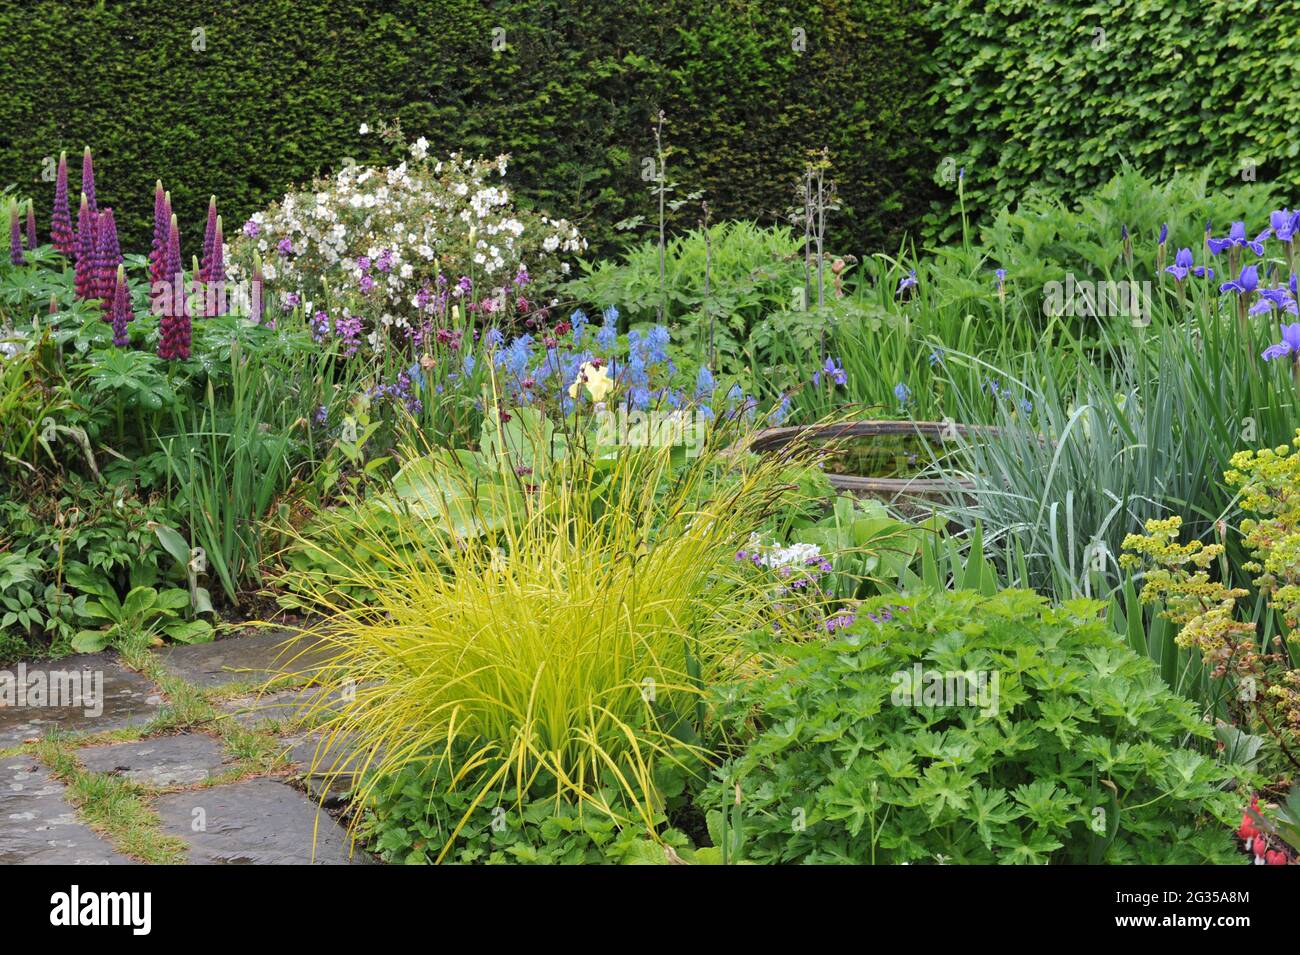 WOLLERTON, SHROPSHIRE / UNITED KINGDOM - 22 MAY 2014: The garden at Wollerton Old Hall Stock Photo